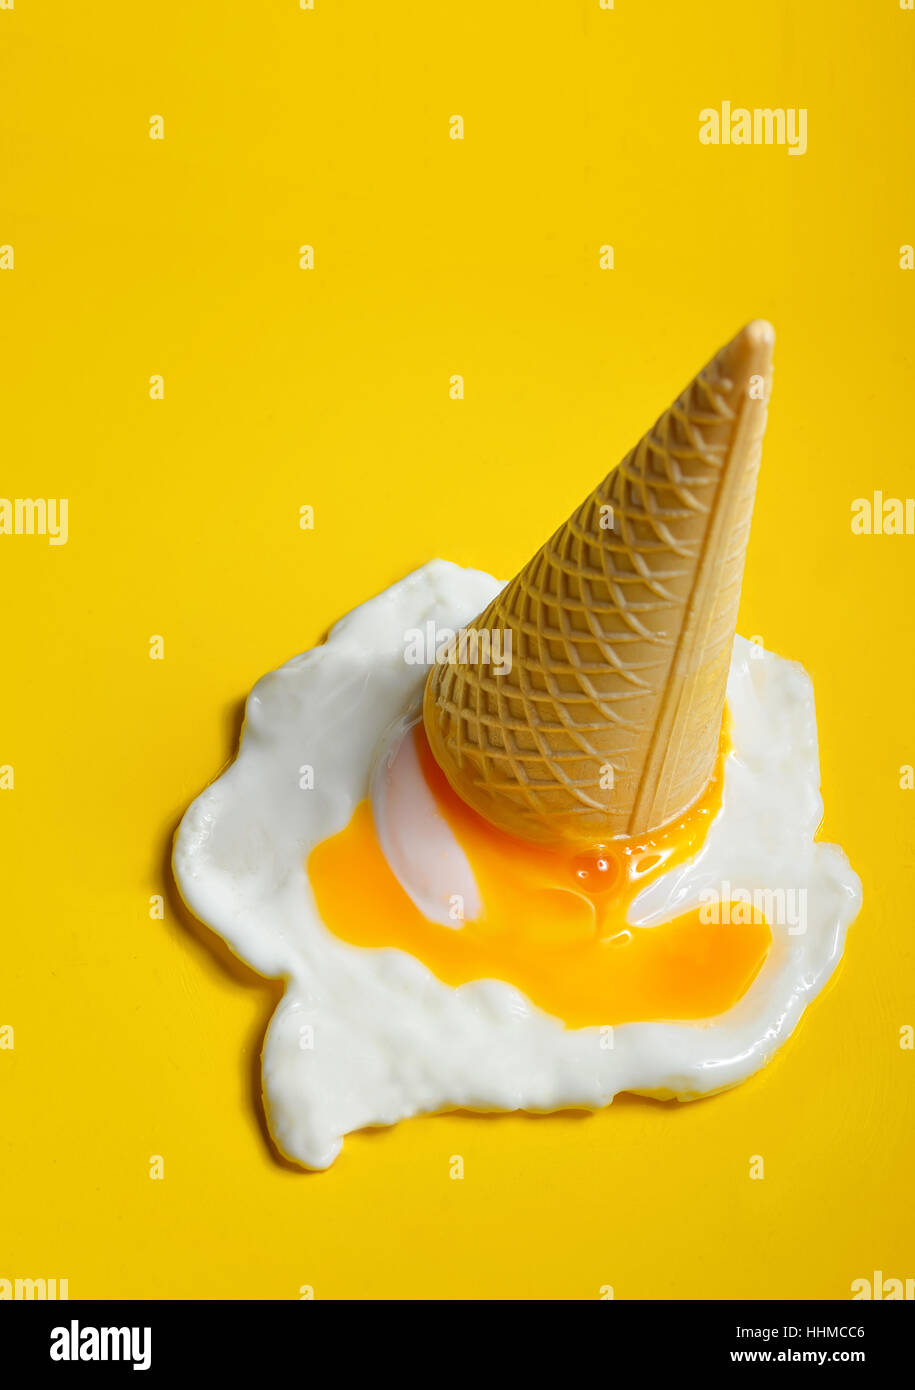 Ice cream cone dropped concept with fried egg Stock Photo